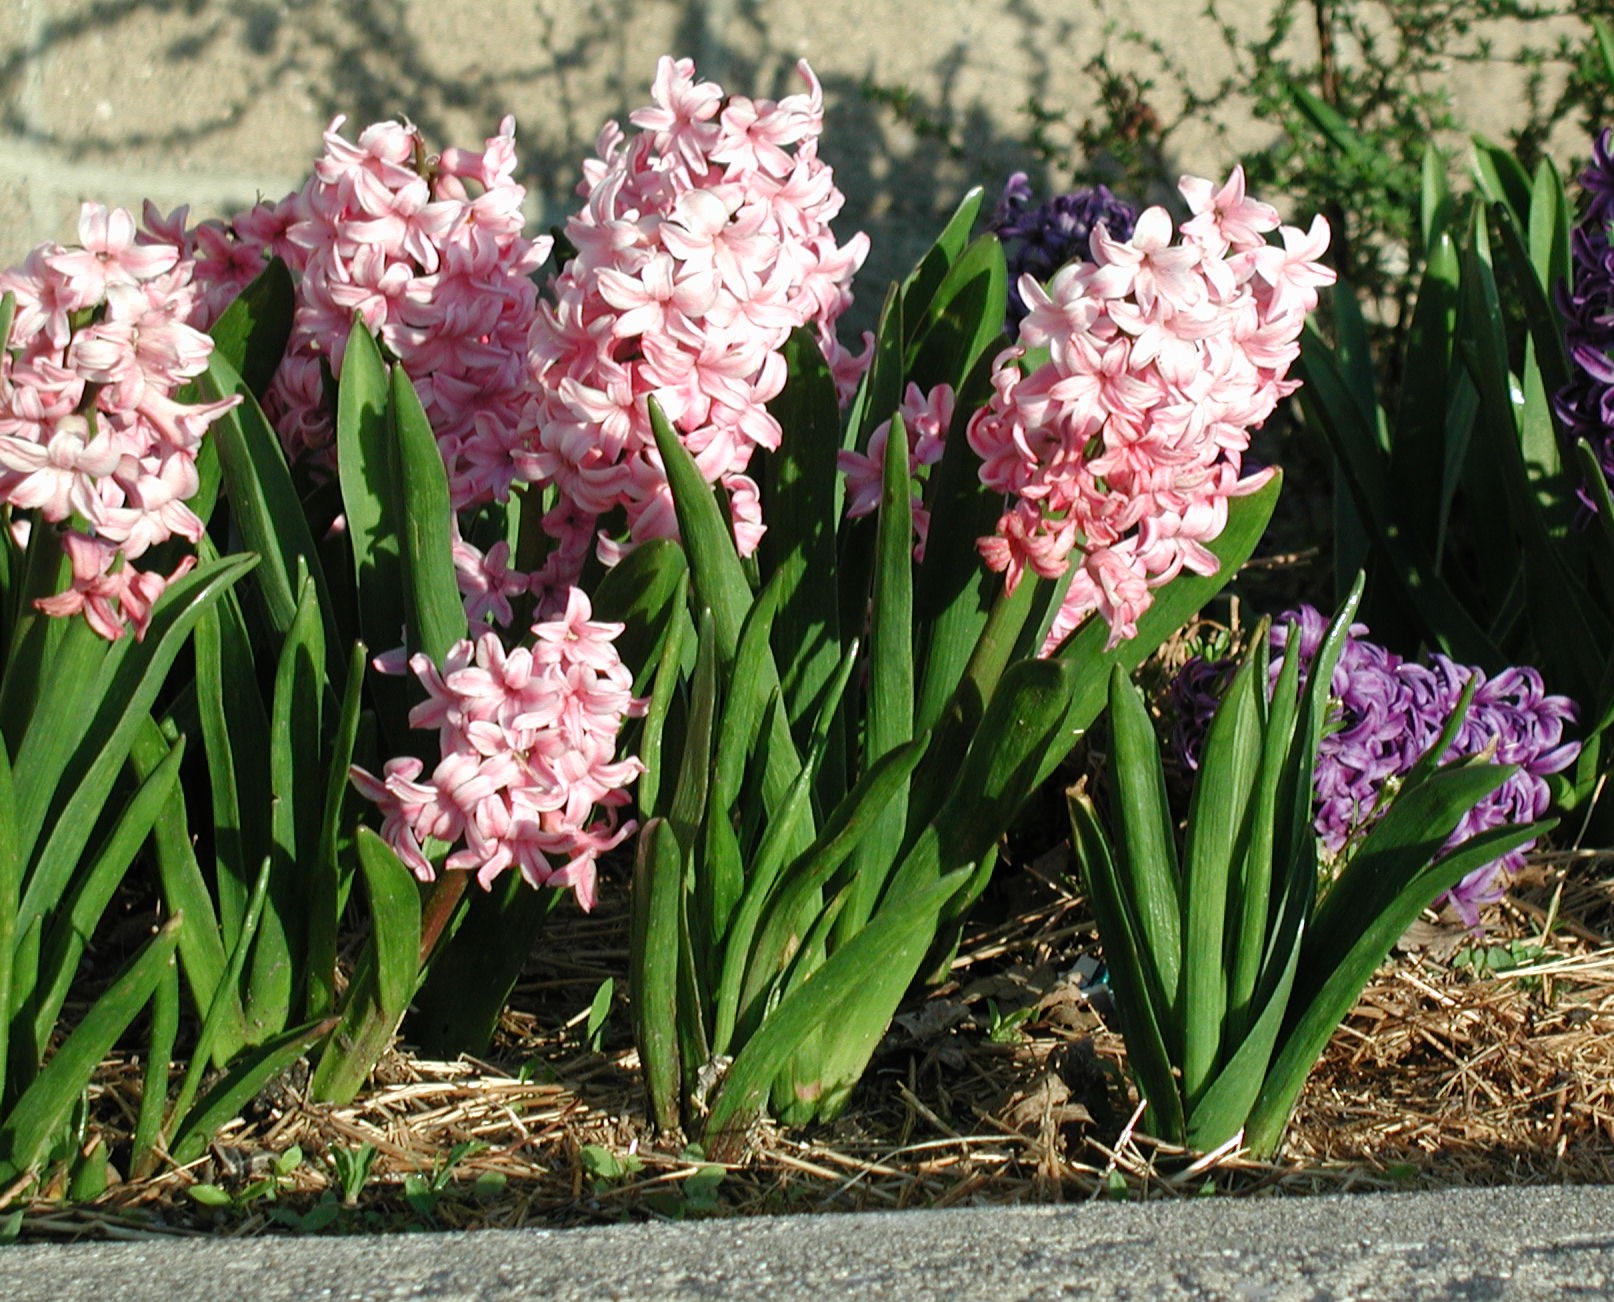 A group of green flowering plants with tall, thin clusters of pink and white flowers.